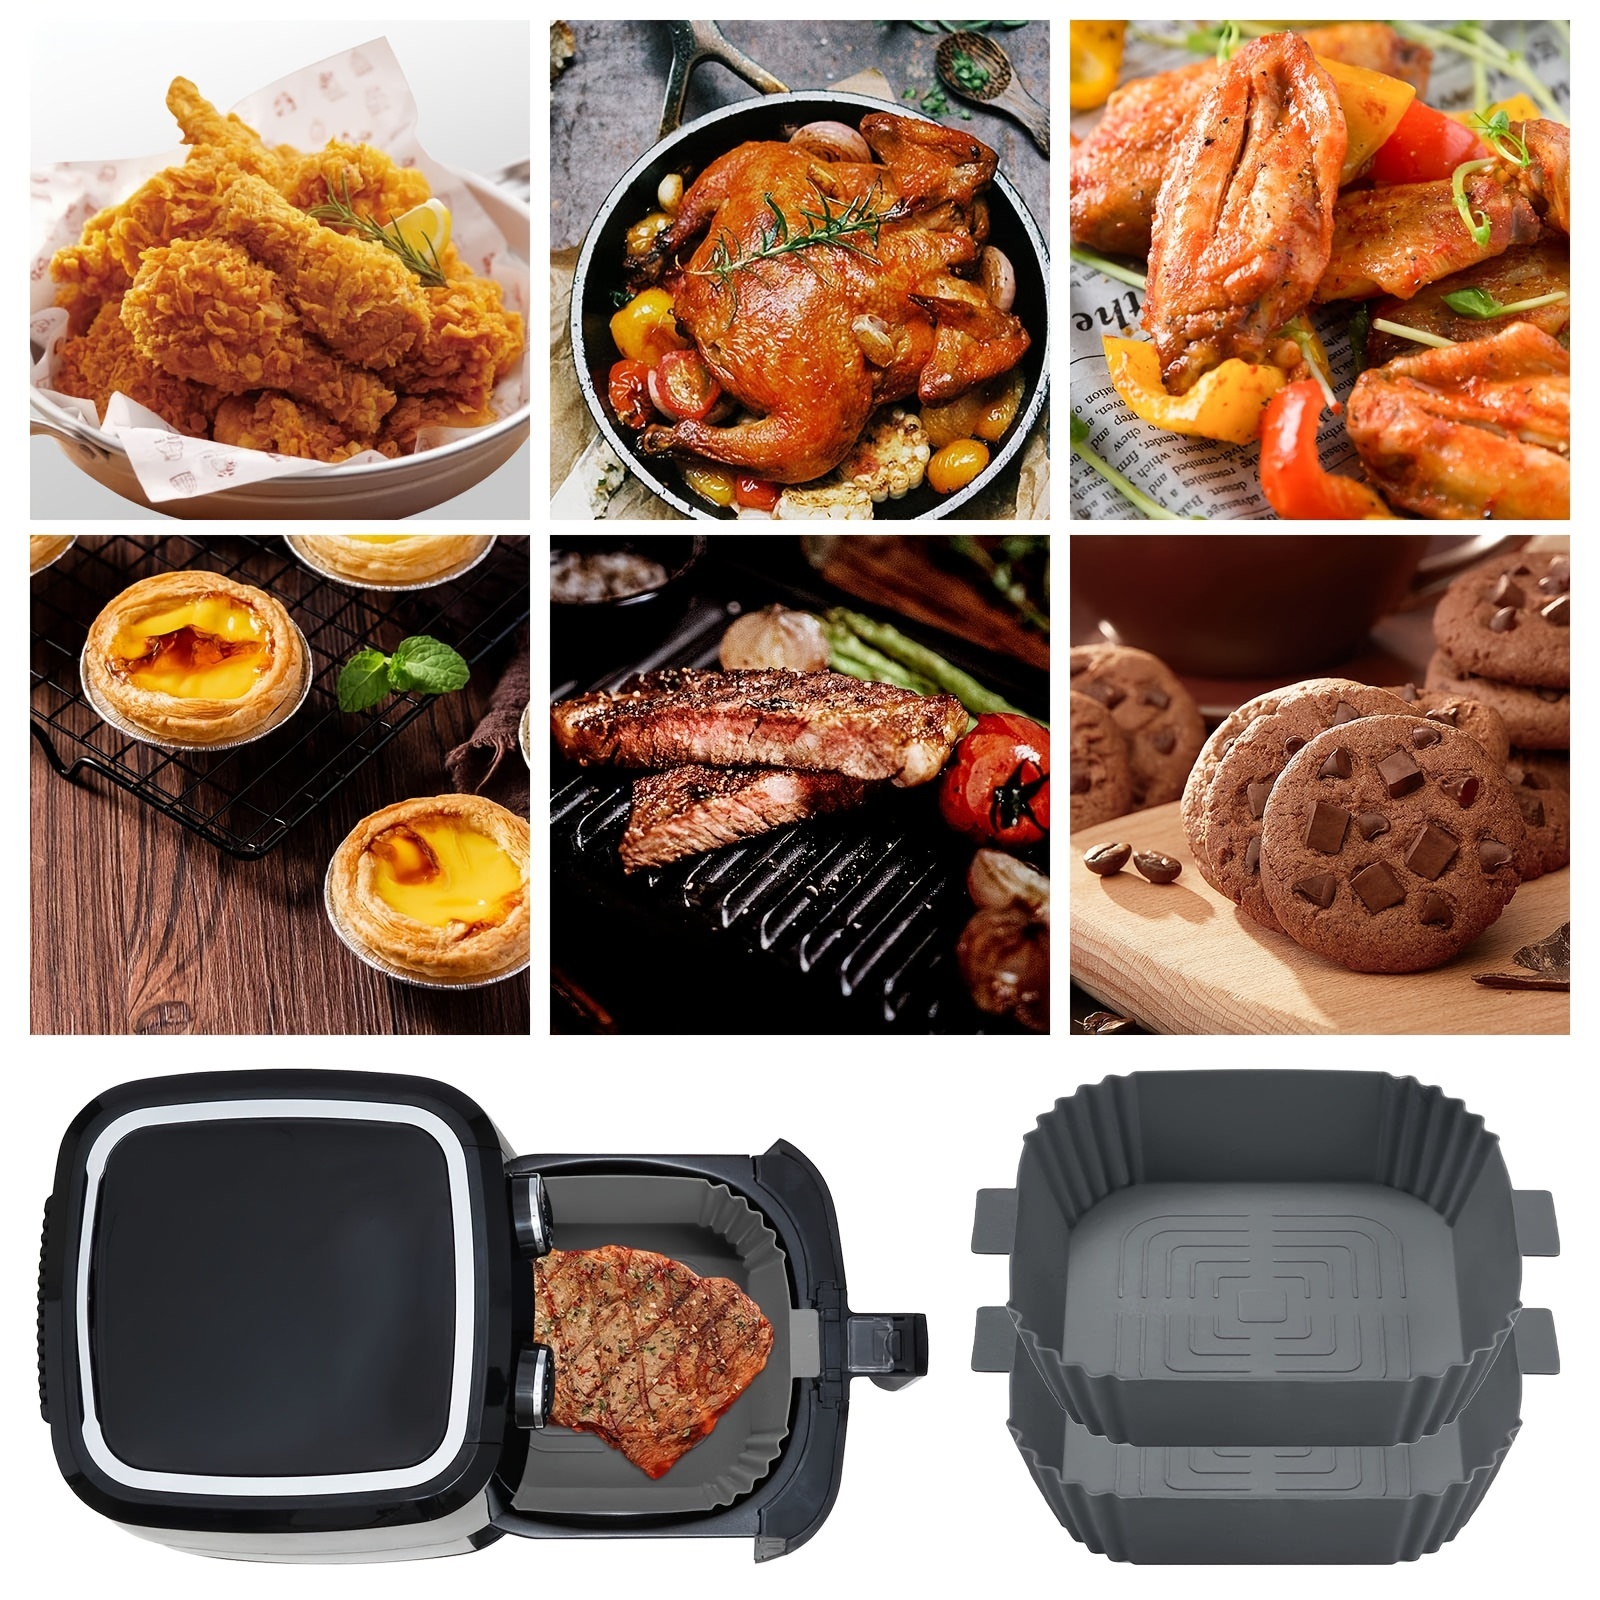 Airfryer Silicone Basket Square Silicone Tray Reusable Airfryer